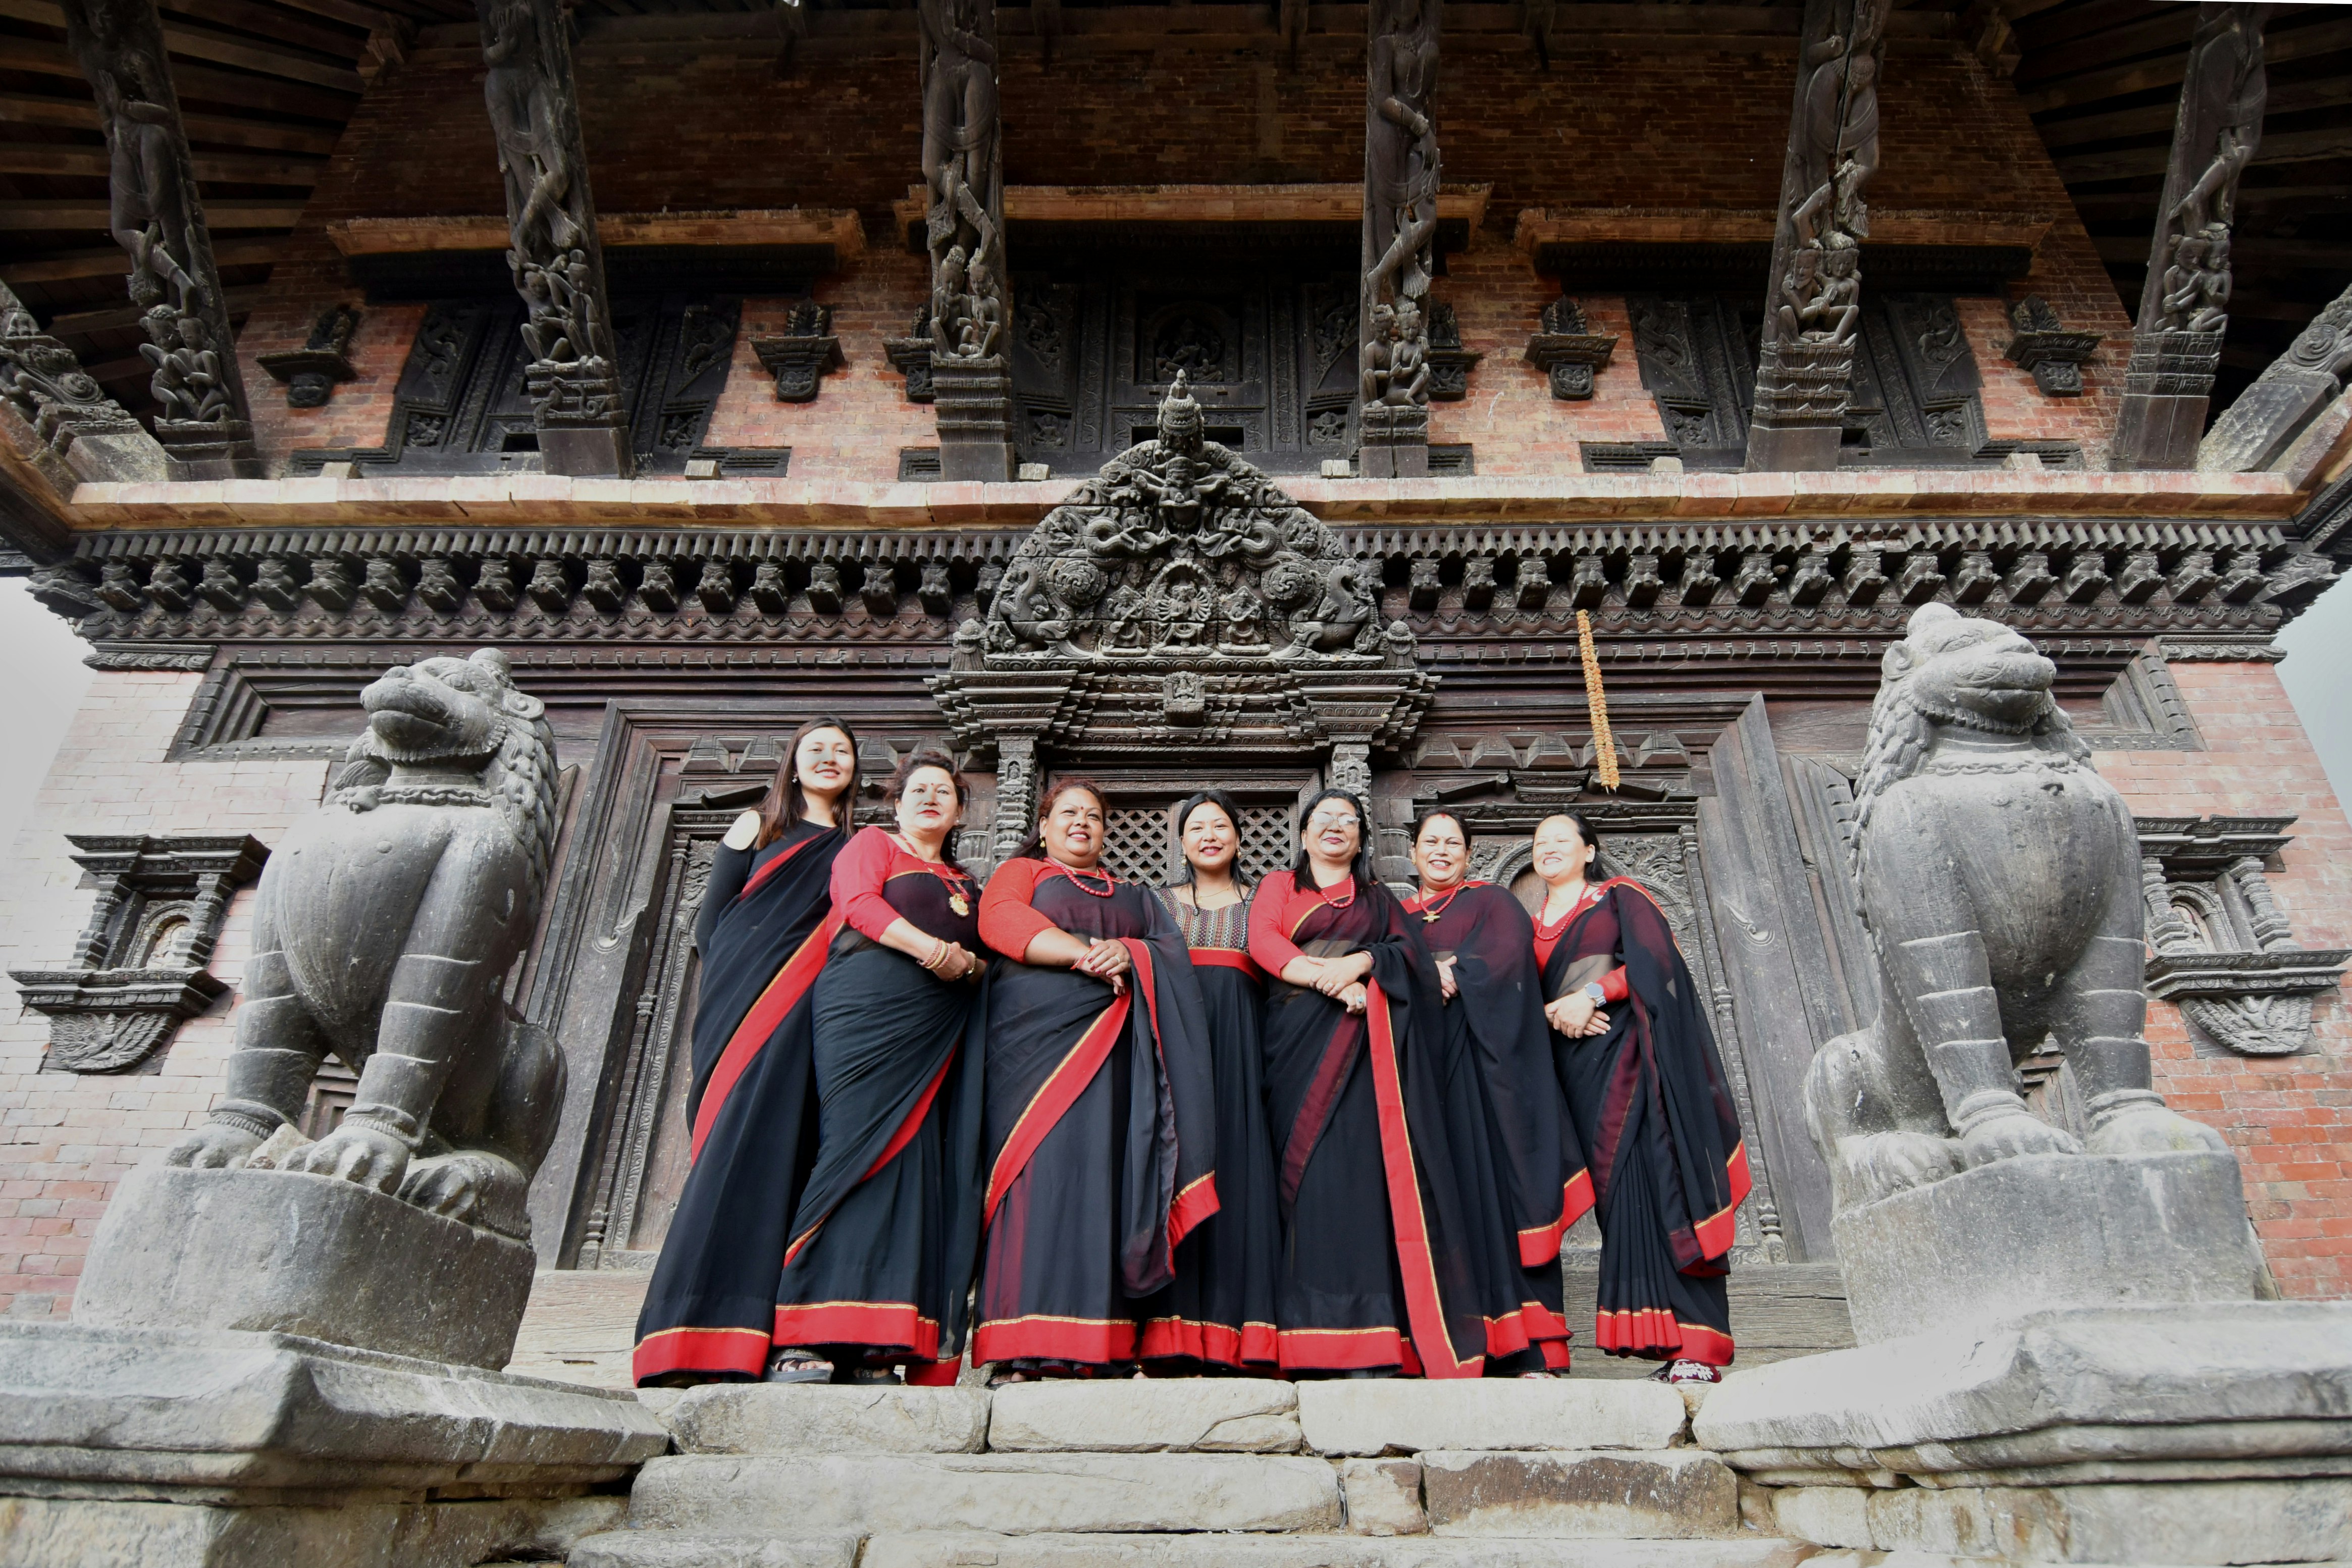 A group of women, all wearing a full-length black and red gown, stand in front of an ornately carved wooden door